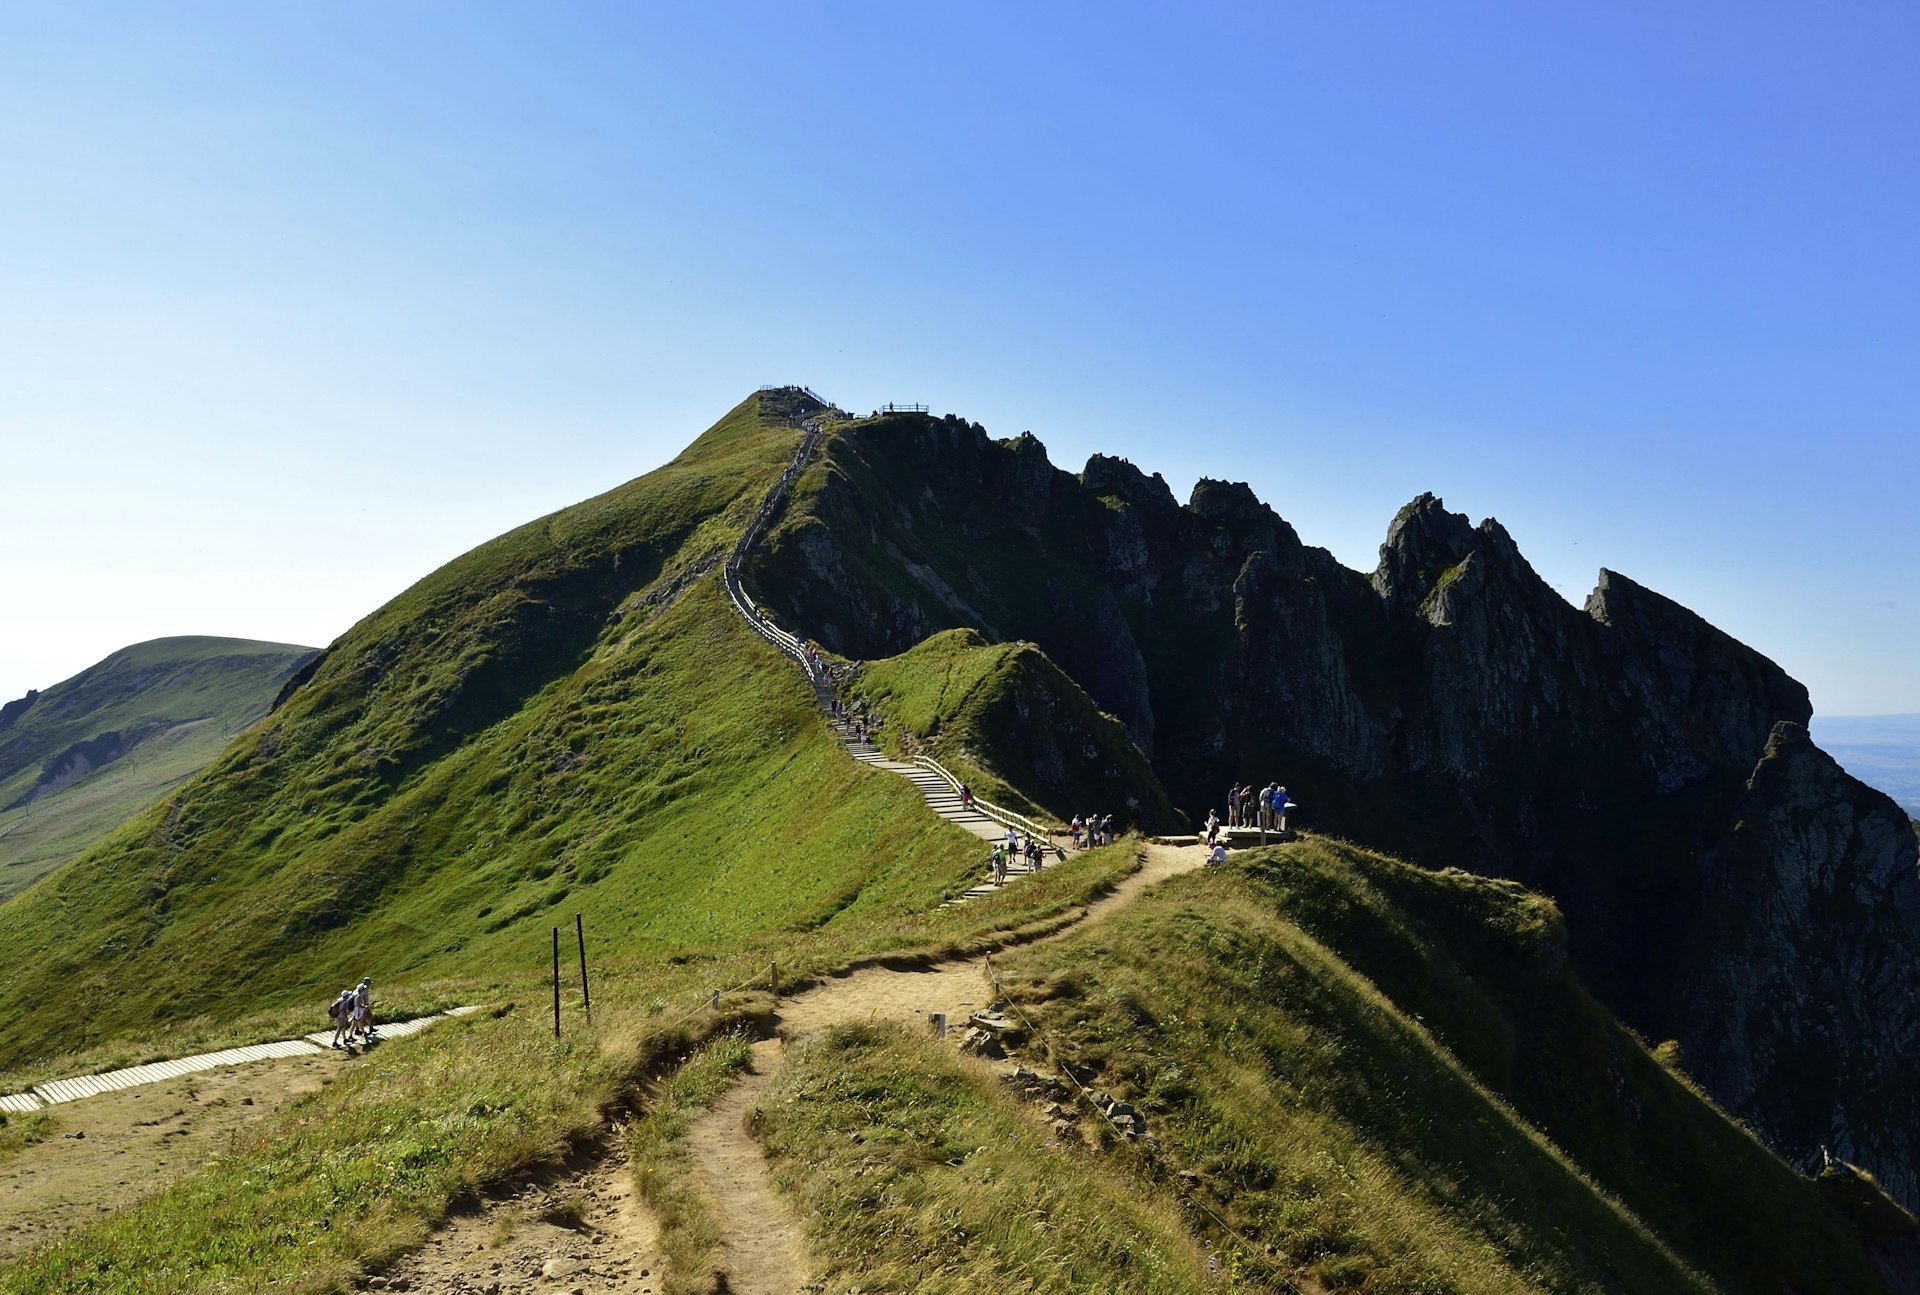 View of the stair leading to the top of Puy de Sancy, Auvergne-Rhone-Alpes